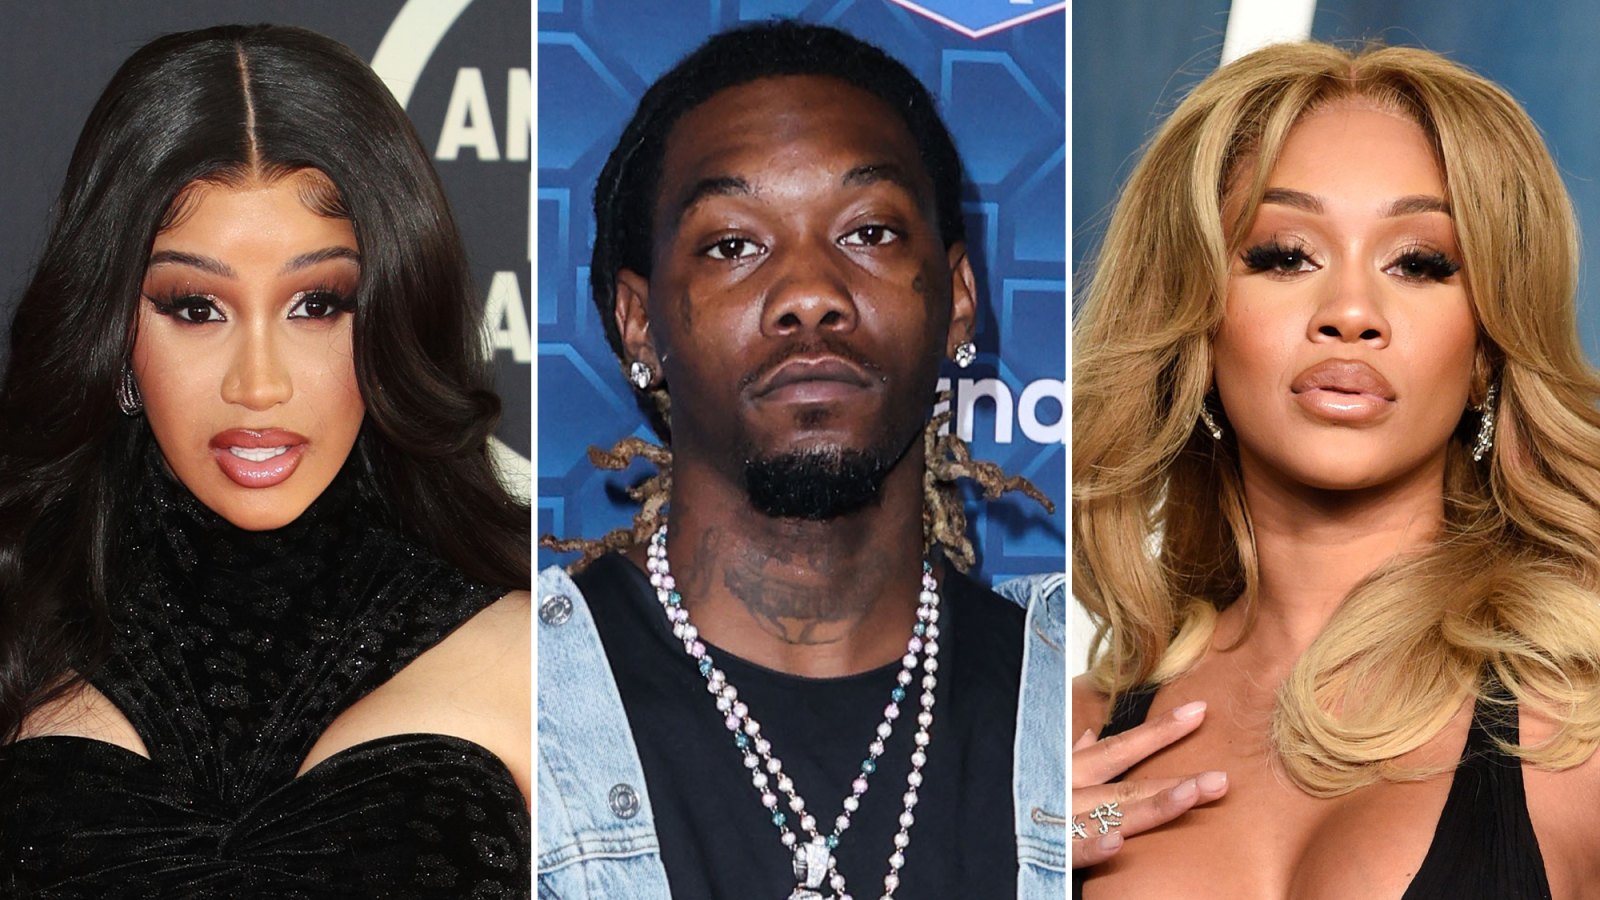 Cardi B Claps Back at Rumors Husband Offset Cheated on Her With Saweetie: 'Makin Crazy Lies' for No Reason